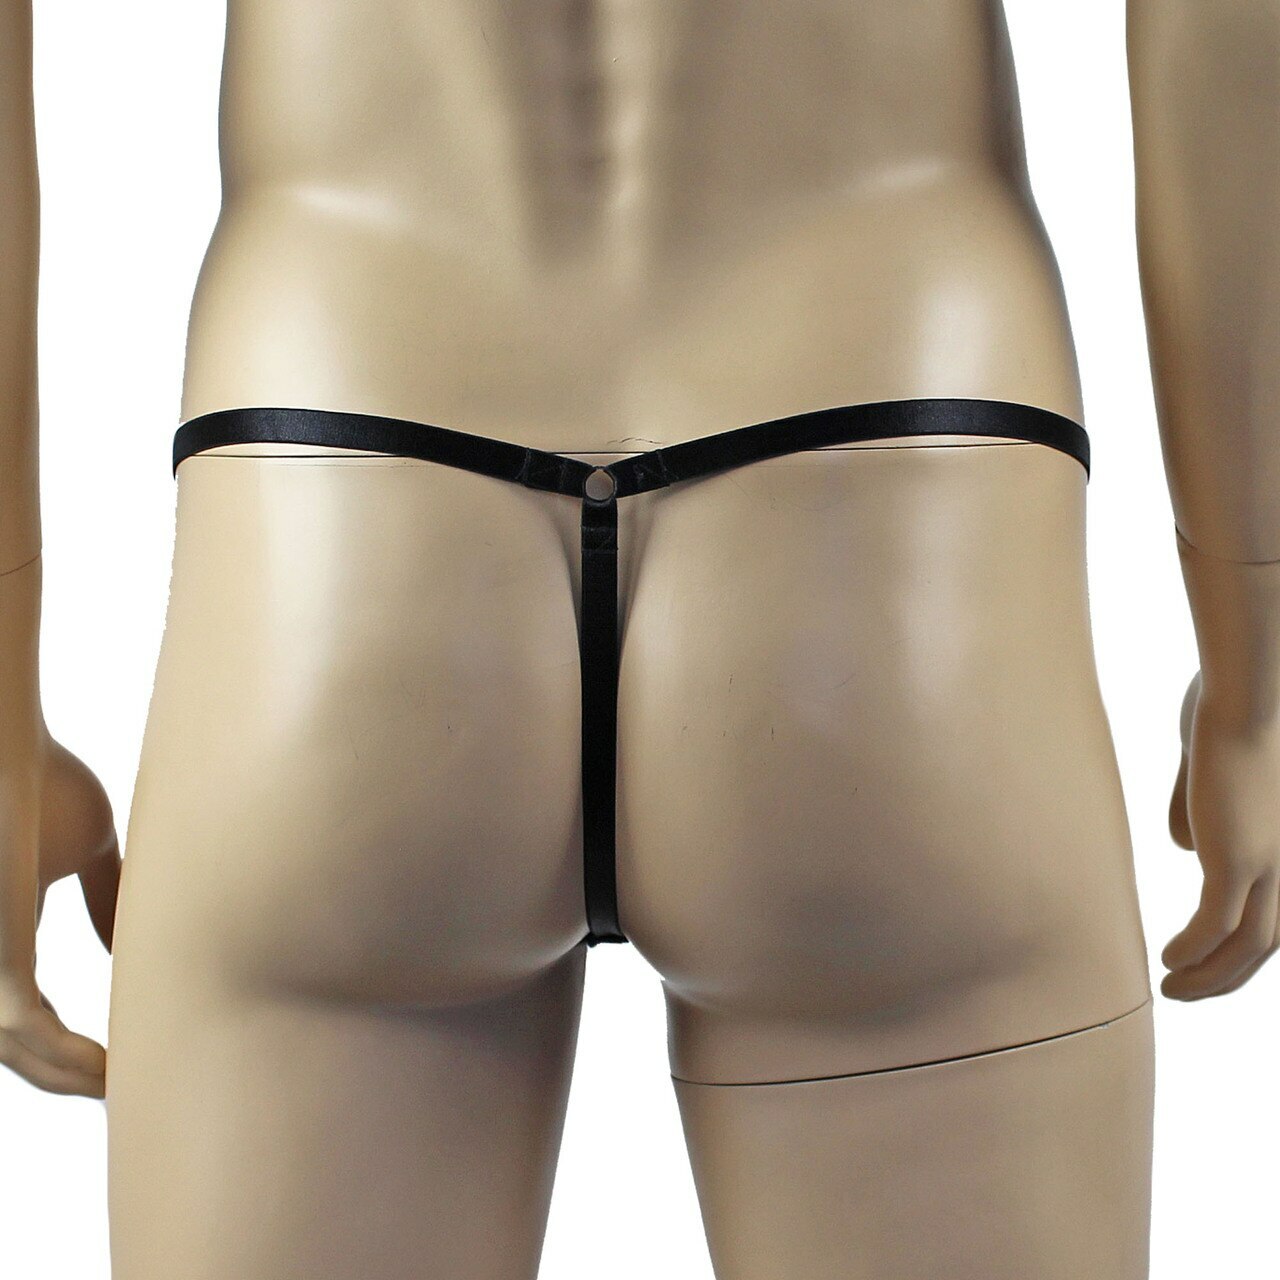 Male Oil Wetlook Pouch G string (black plus other colours)